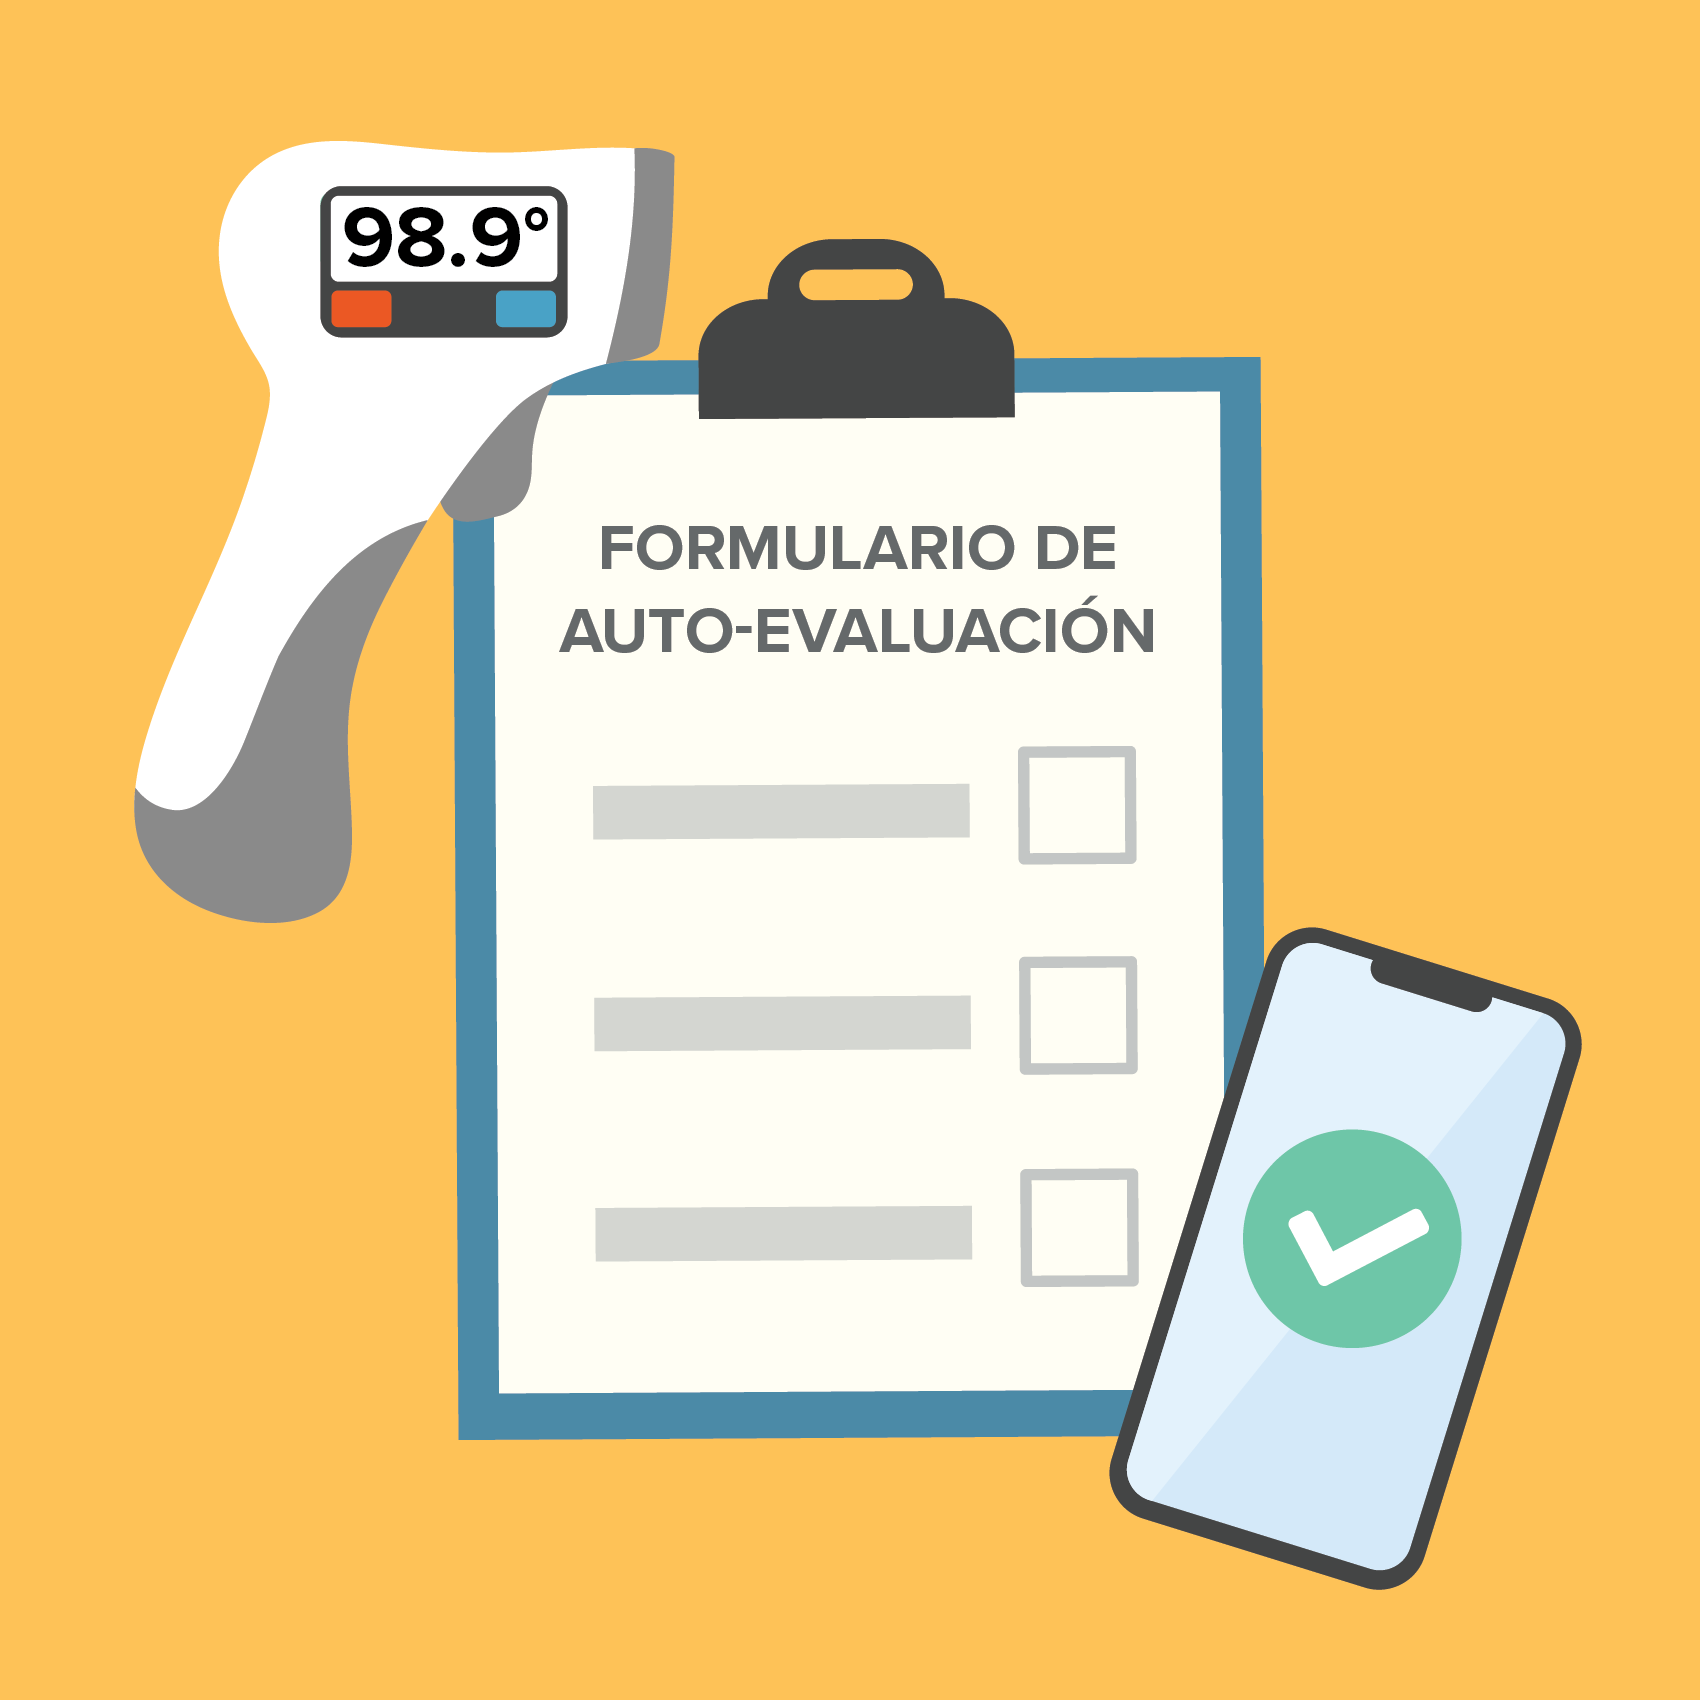 Graphic of thermometer, clipboard titled “formulario de evaluacion”, and phone with green check mark 